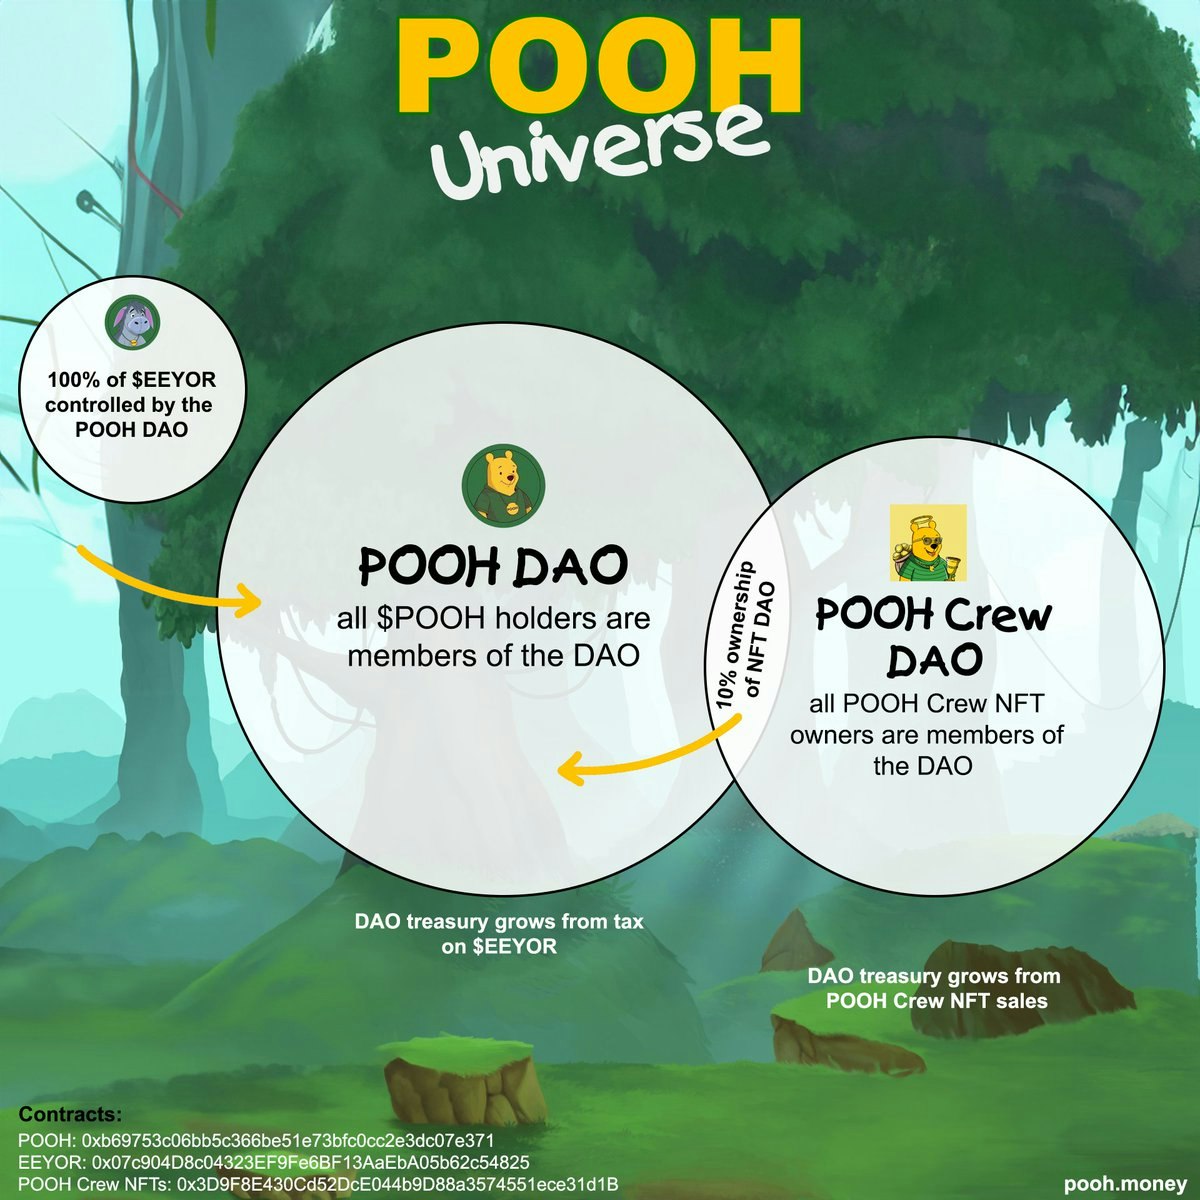 featured image - Why I Stay Bullish on $POOH and the POOH Universe